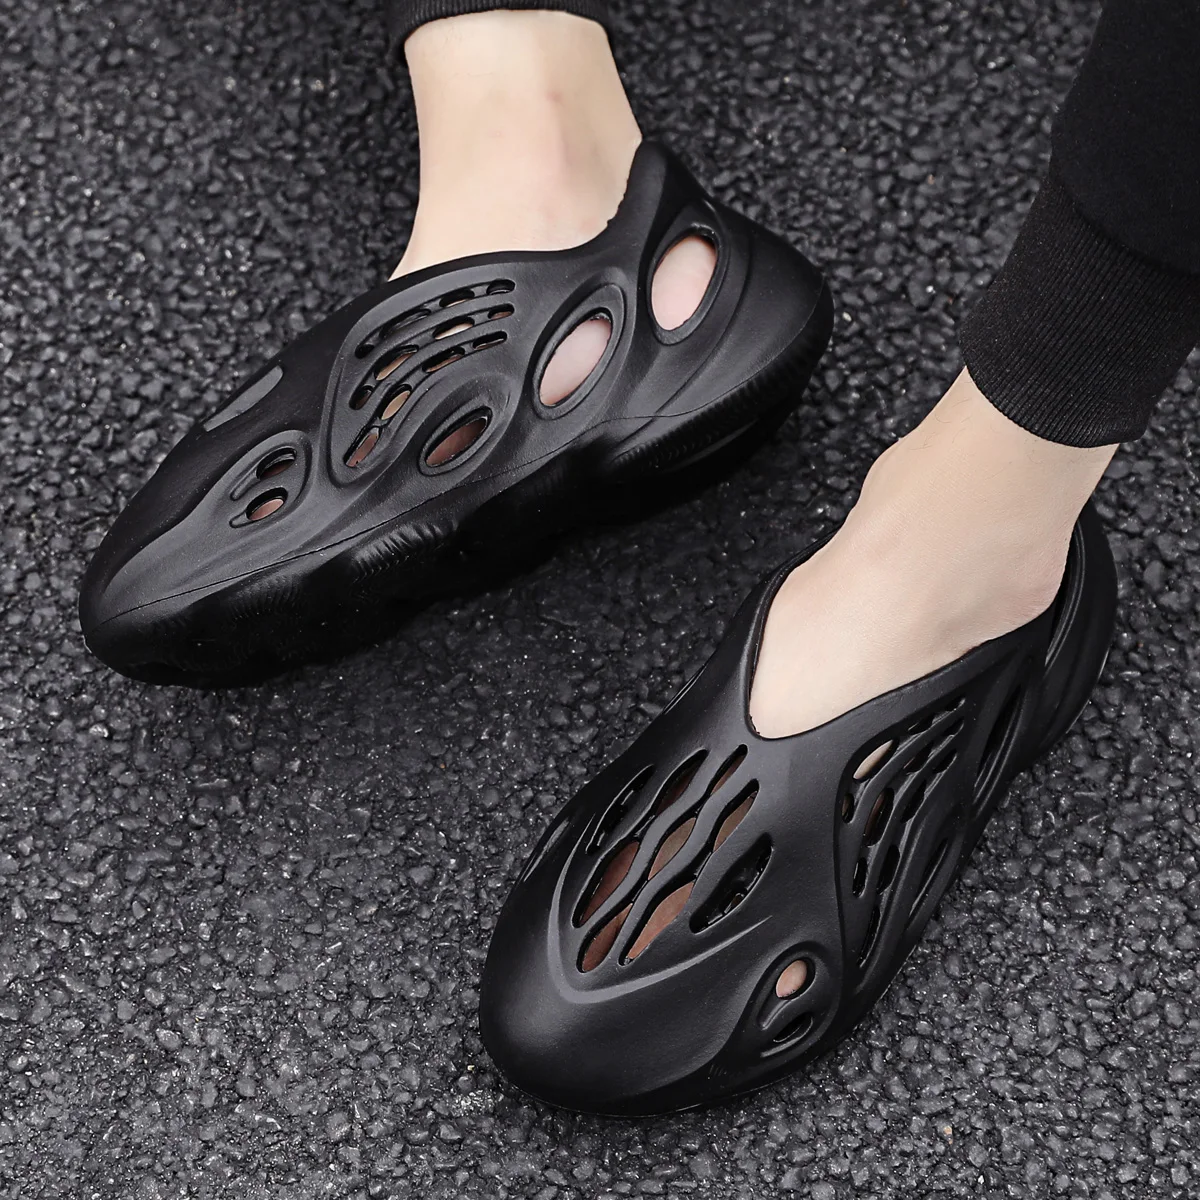 Yeezy New Trend Hole Shoes Summer Slippers Original Flip Flop Leisure ...